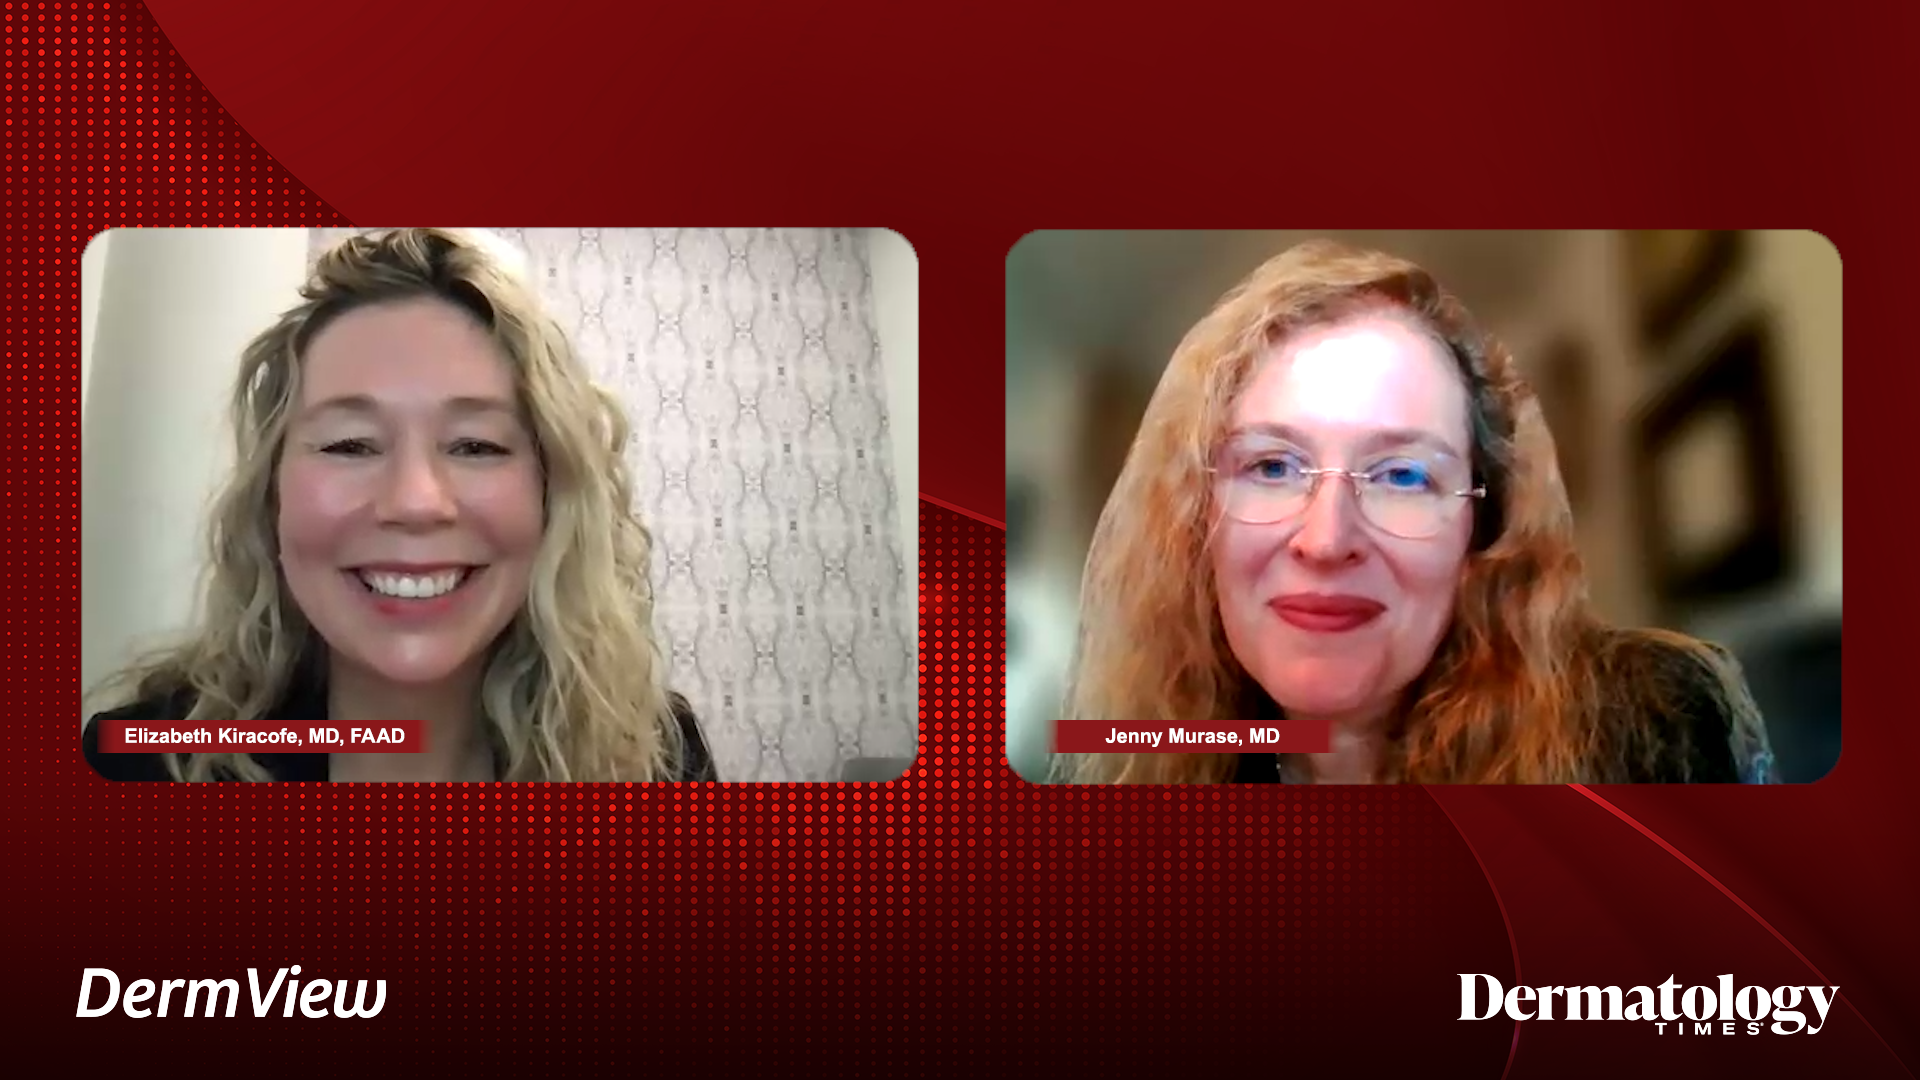 Elizabeth Kiracofe, MD, FAAD, and Jenny Murase, MD, experts on atopic dermatitis